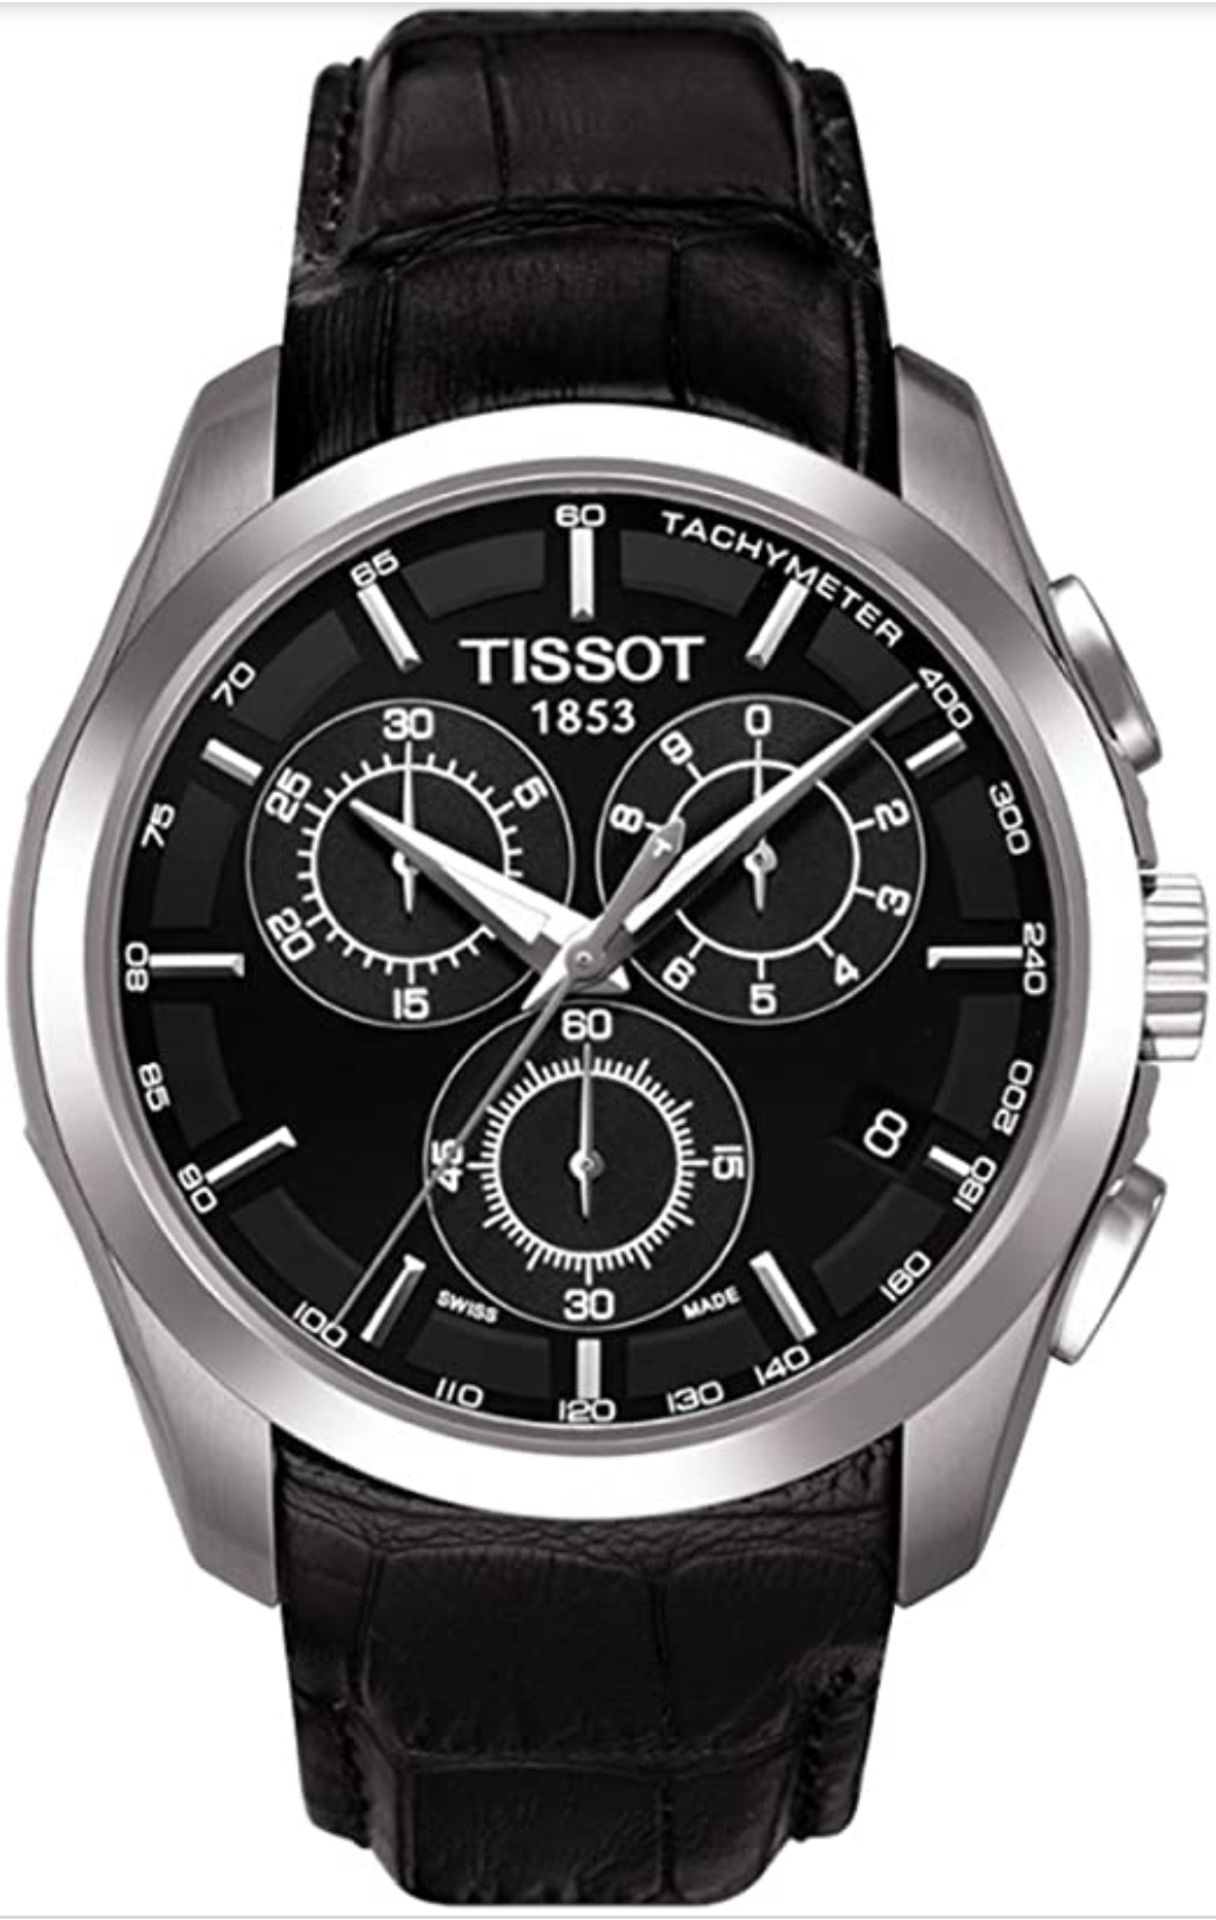 Tissot Couturier Men's Black Leather Strap Chronograph Watch T035.617.16.051.00 - Image 5 of 11